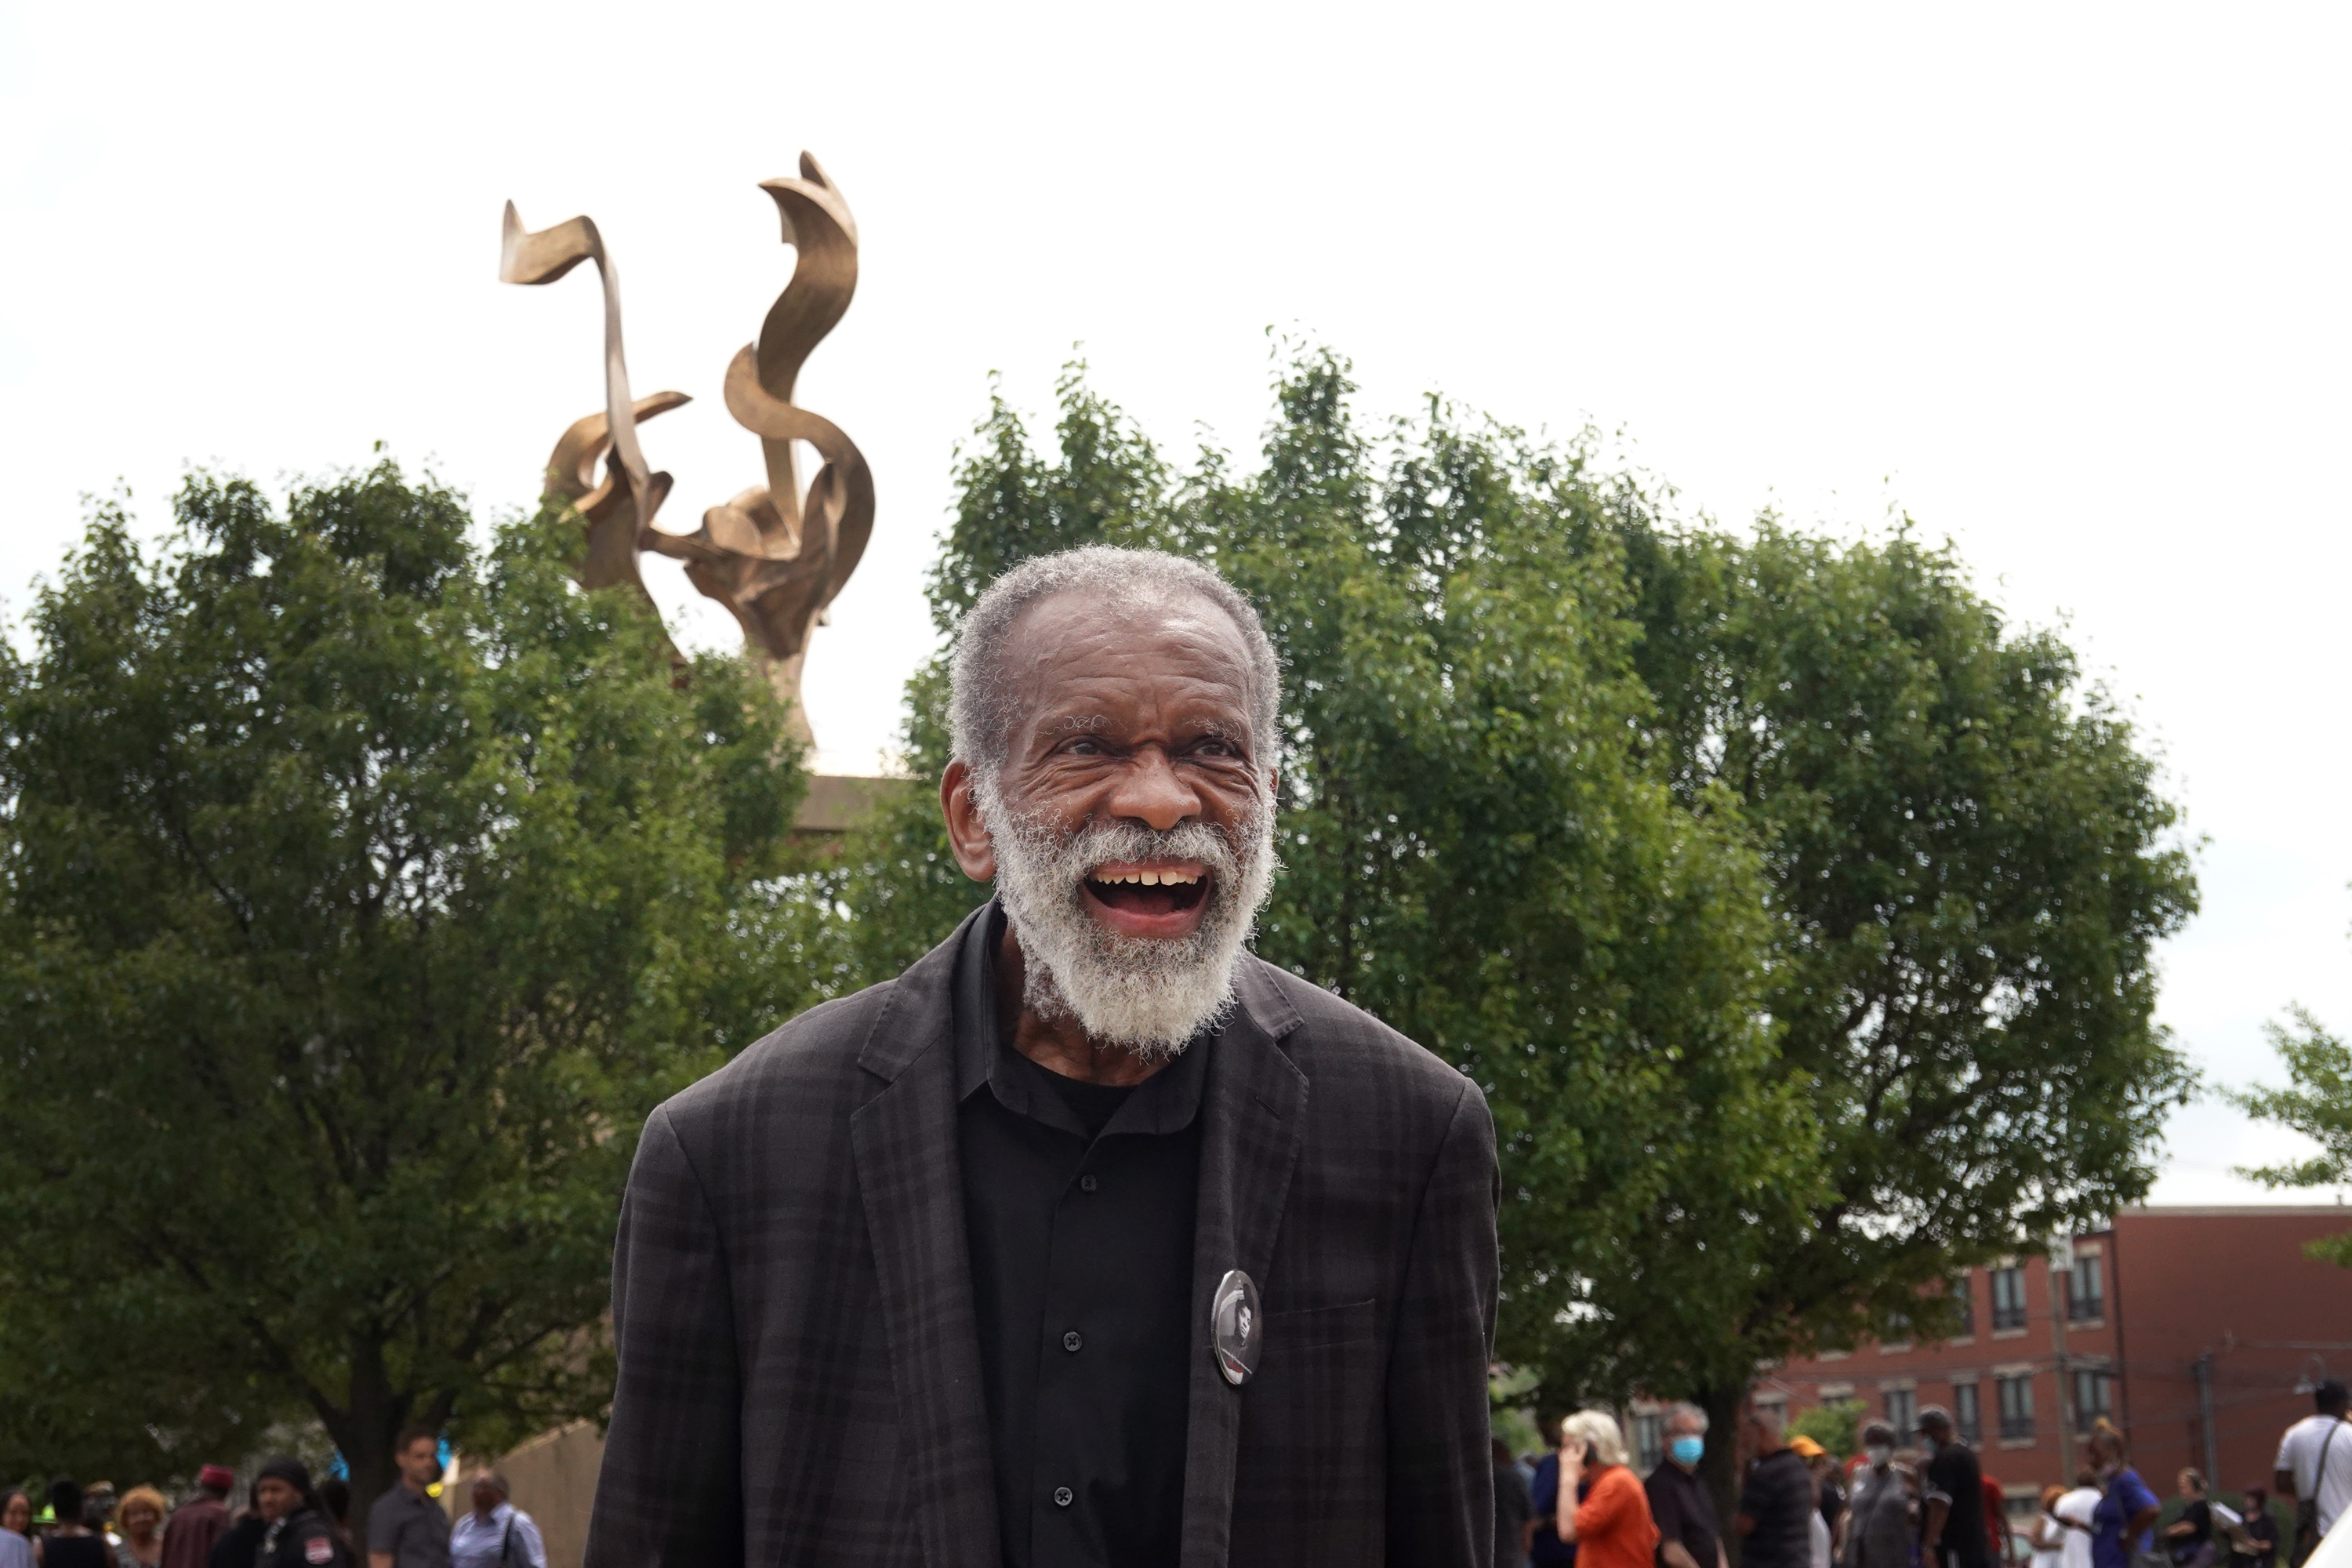 Richard Hunt, prolific Chicago sculptor whose public works explored civil rights, dies at 88